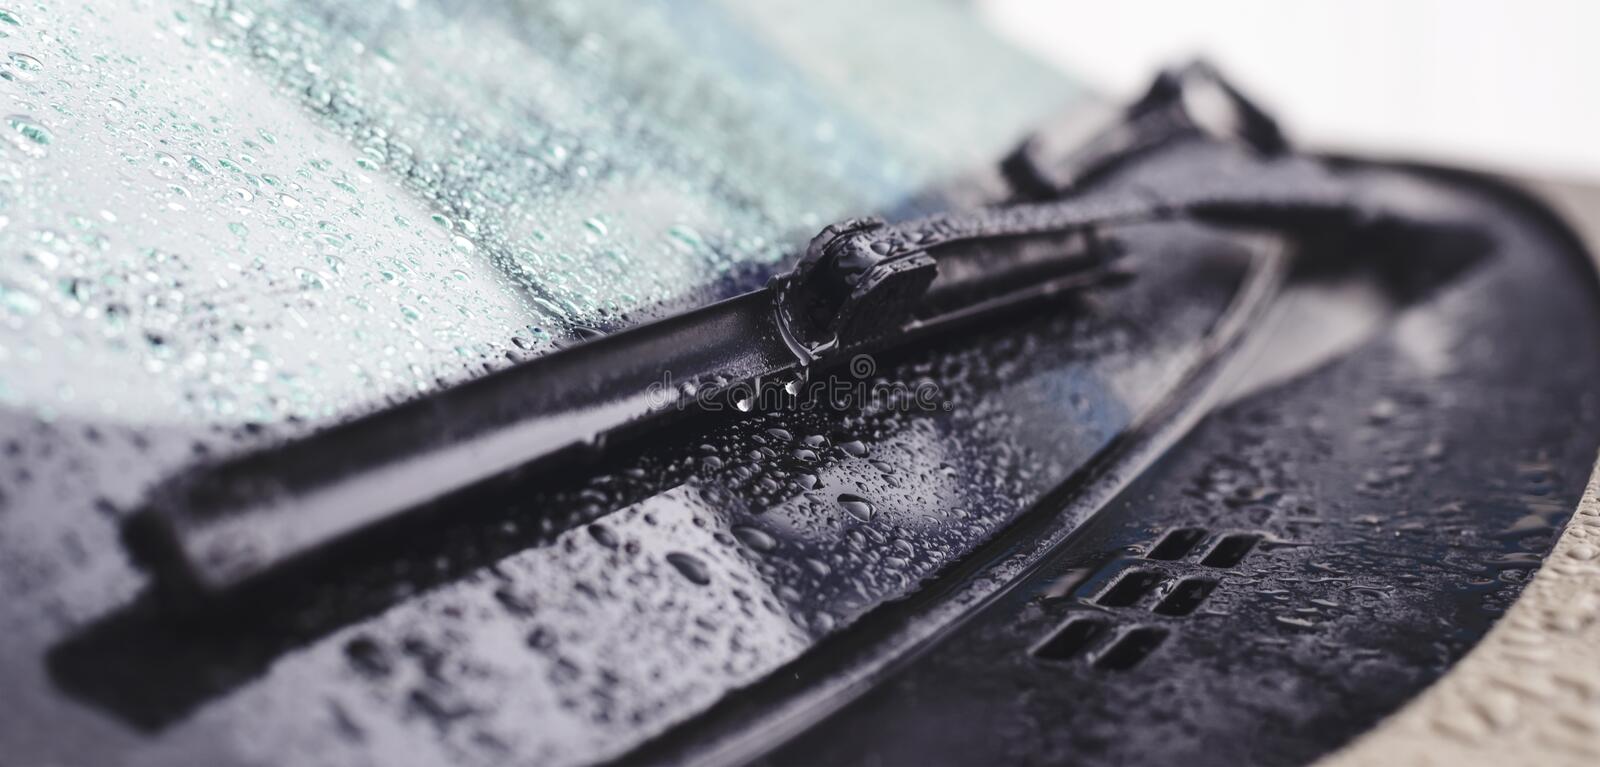 Are Your Wiper Blades Showing Signs Of Wear Tear?